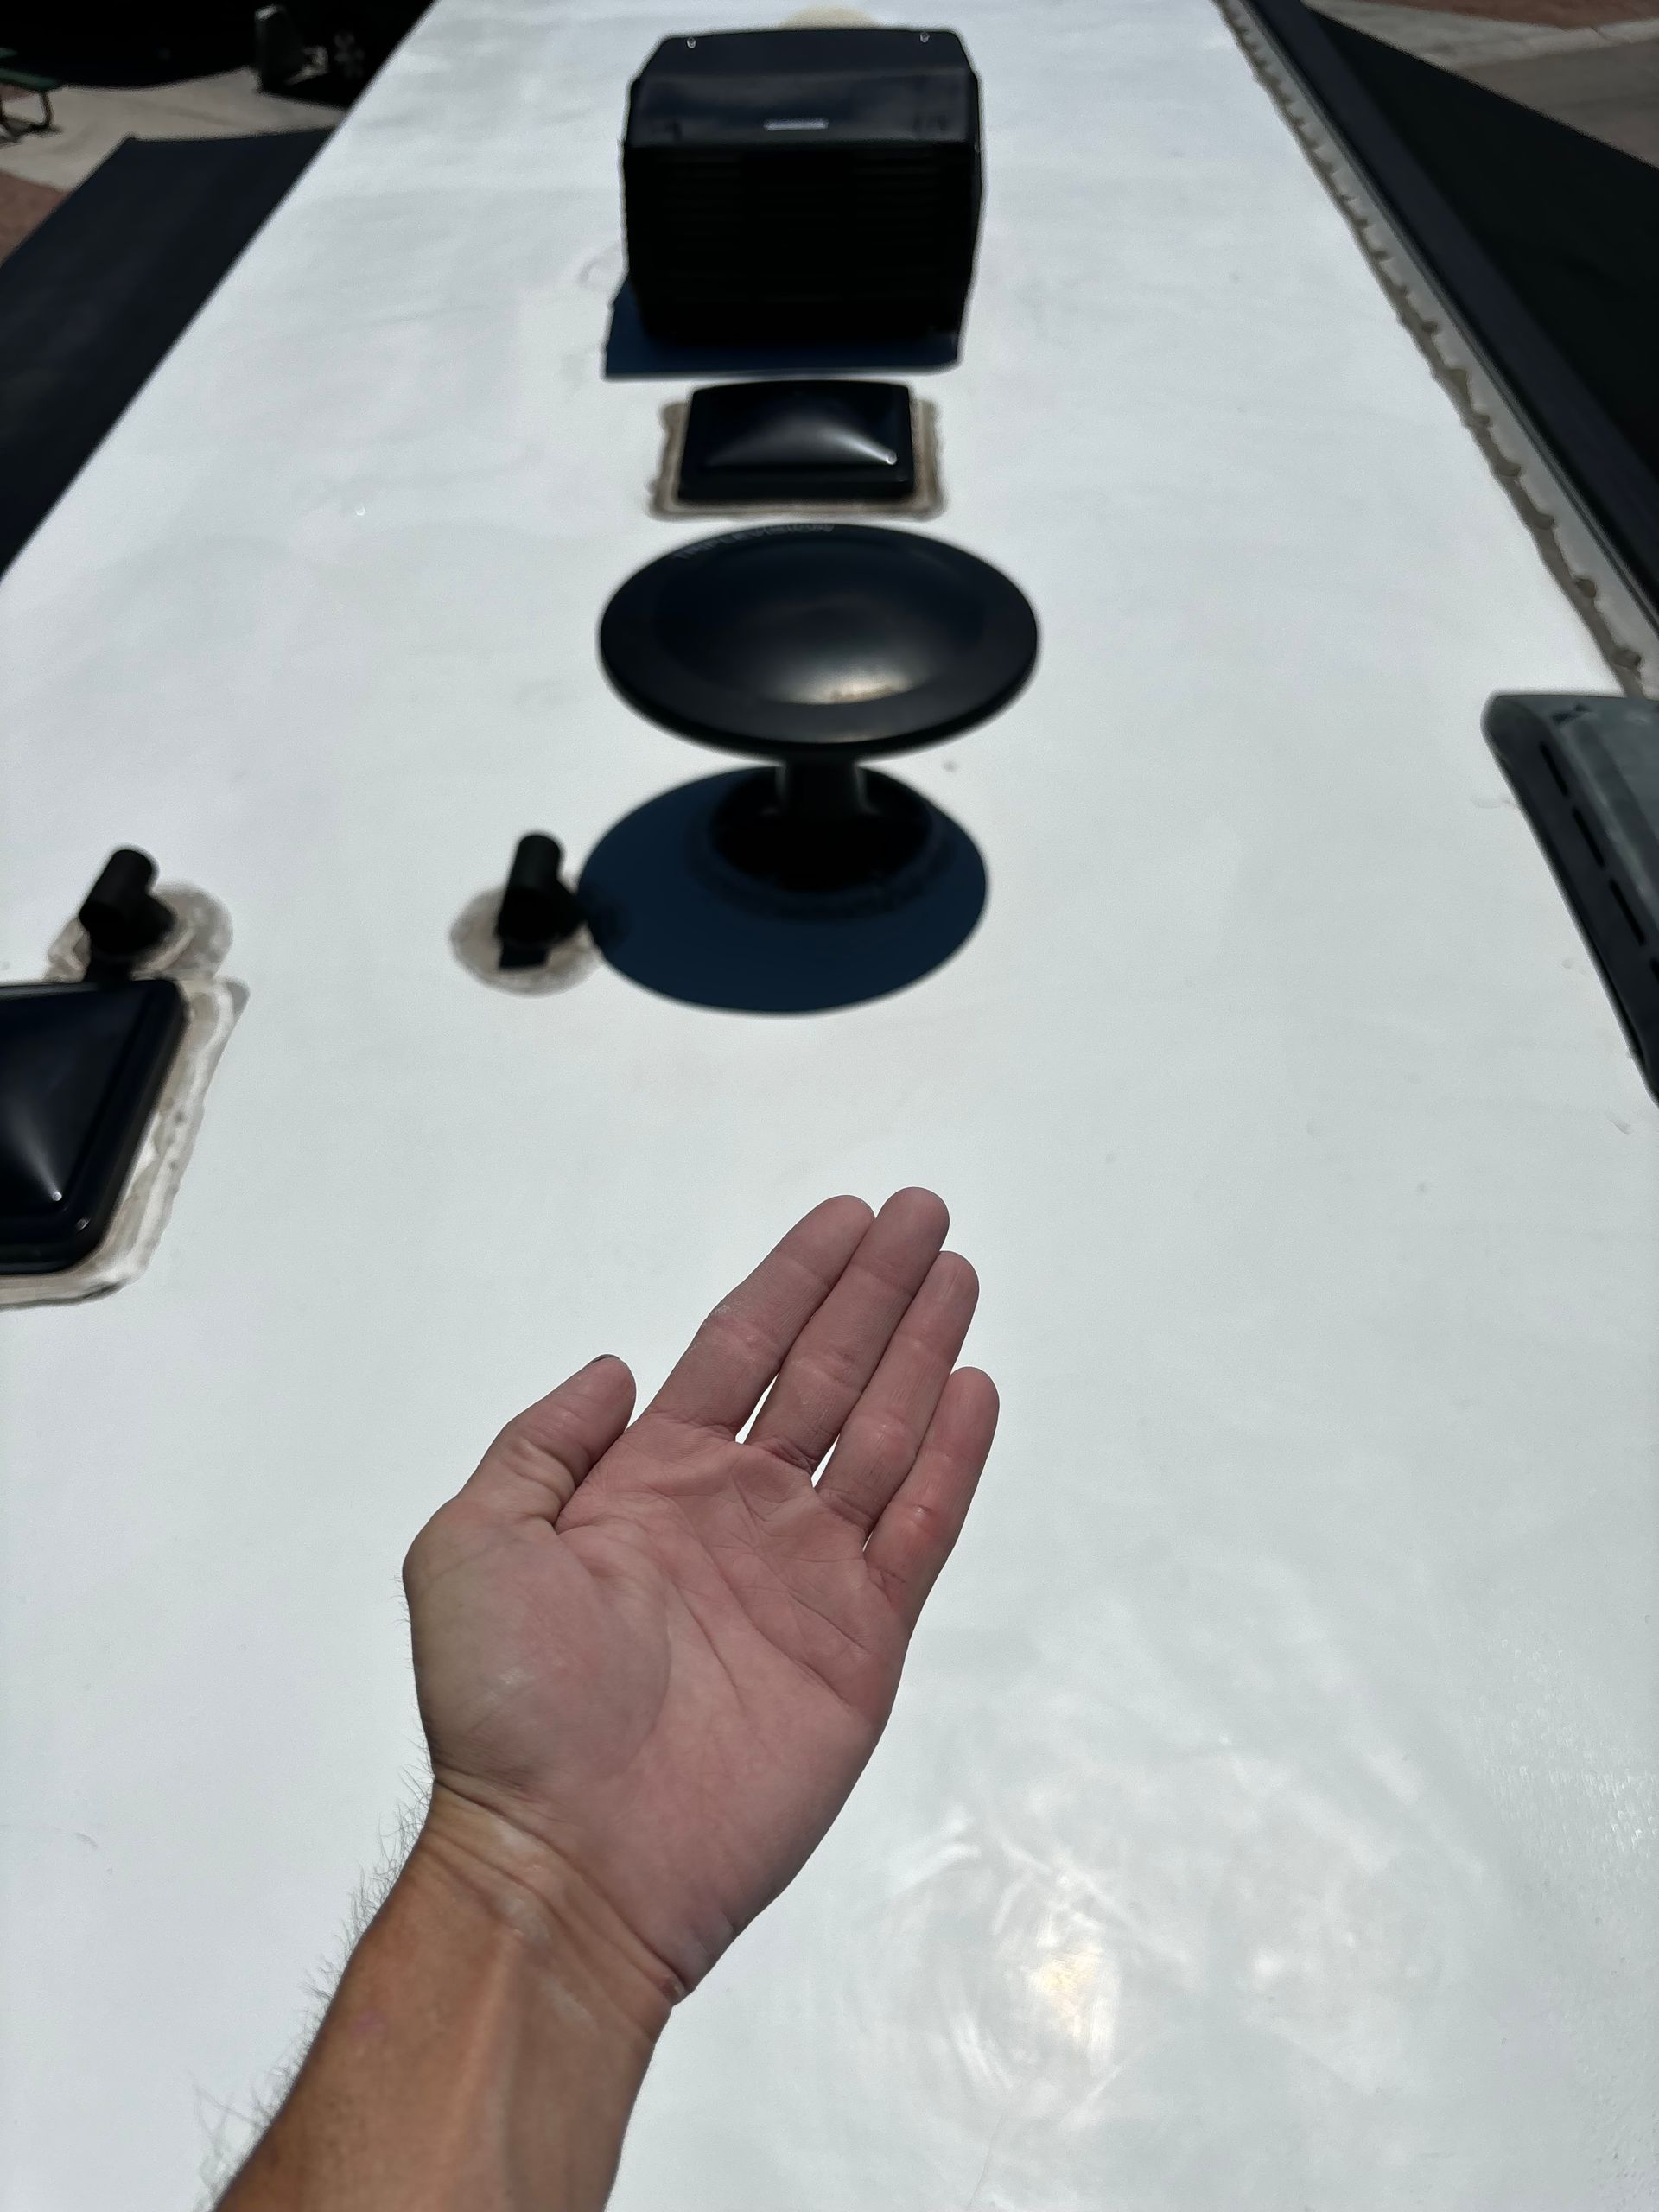 A person 's hand is reaching out towards a white surface